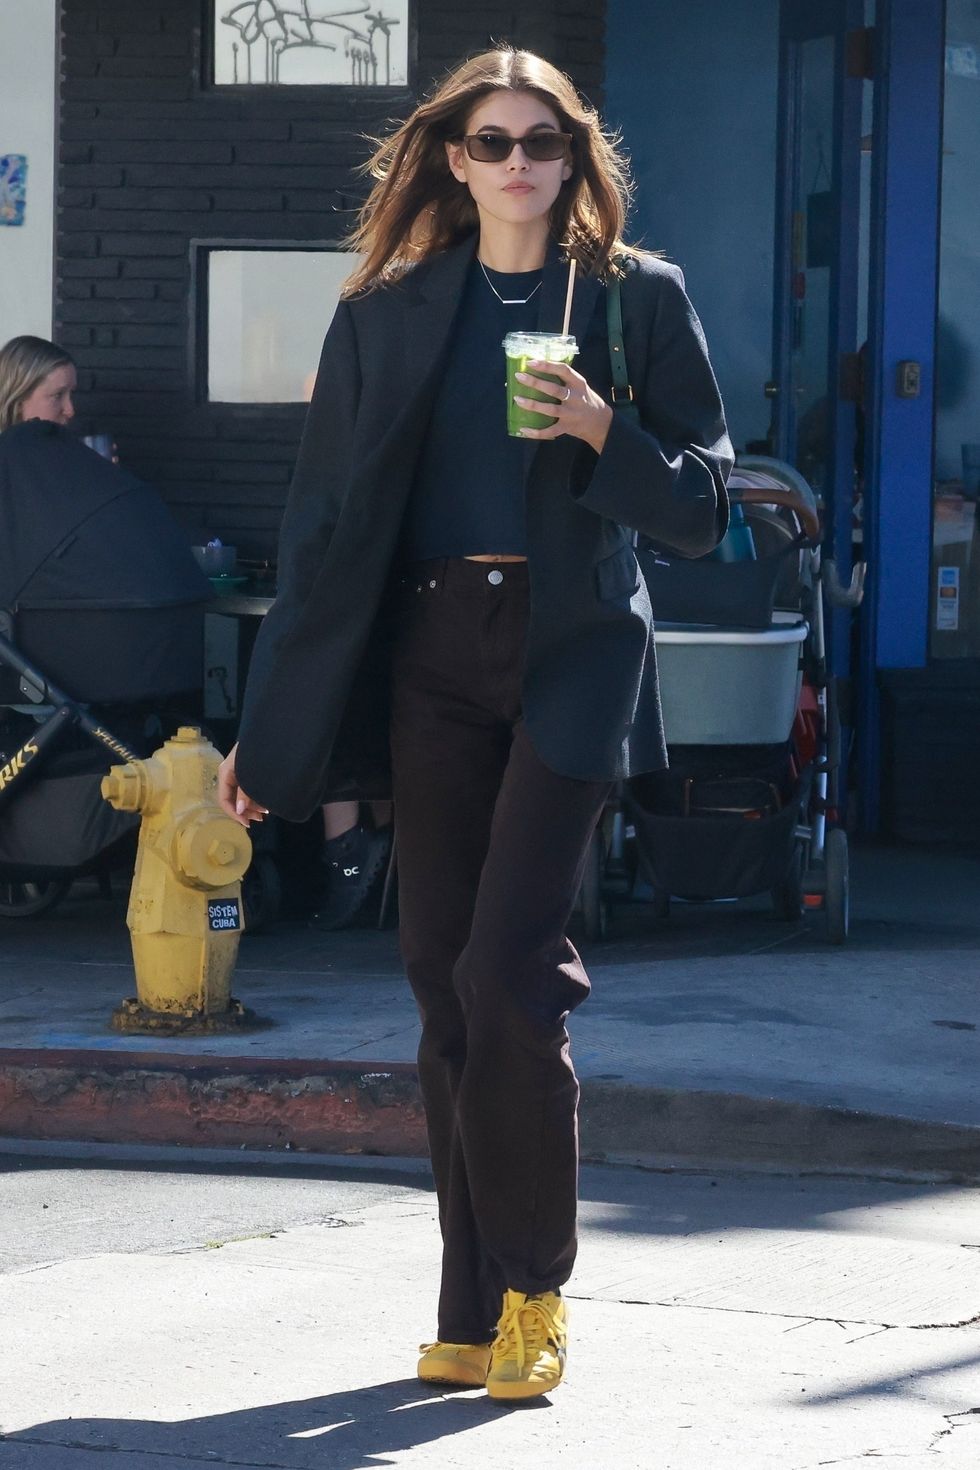 kaia gerber wearing black separates in a story about onitsuka mexico 66 sneakers 2023